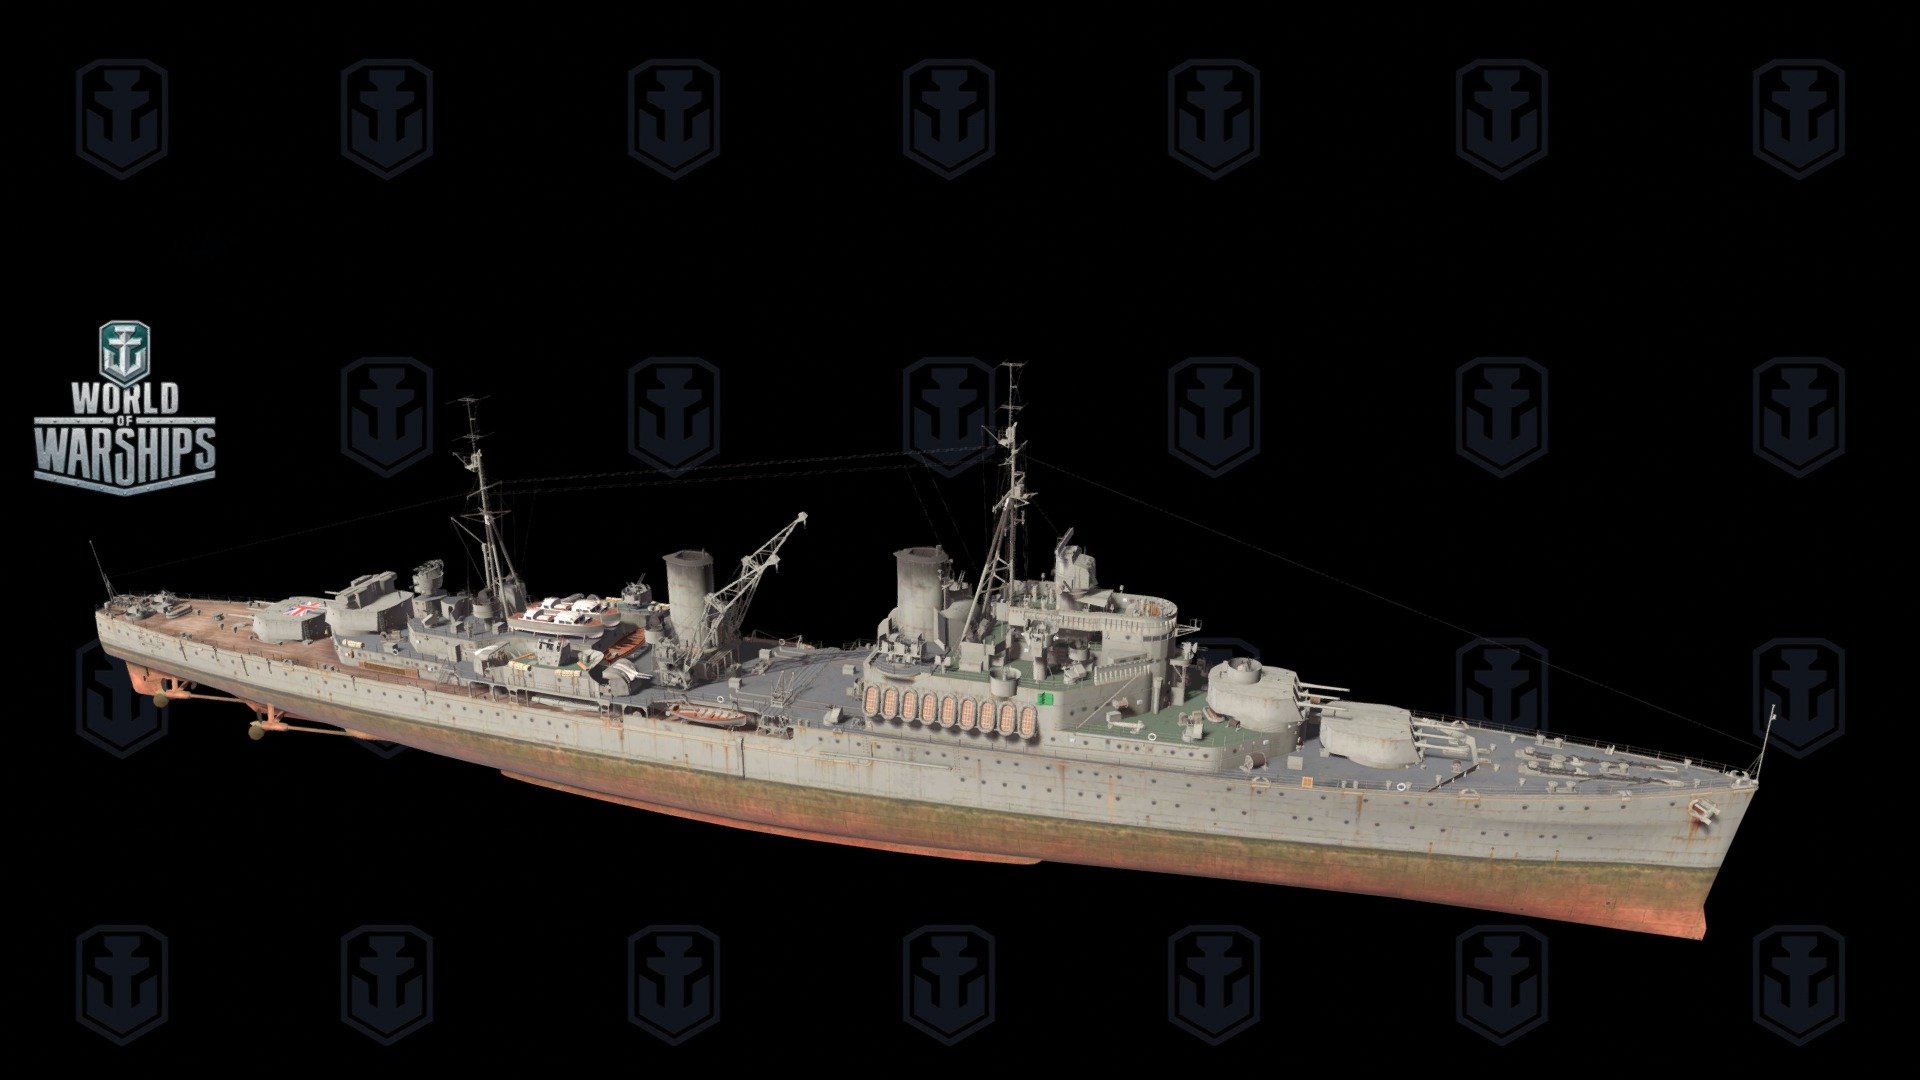 Fiji — British Tier VII cruiser.

A further development of a multi-purpose cruiser ship for the Royal Navy. Despite the fact that the ship's displacement was limited by international treaties, she carried numerous rapid-firing main guns.

If you want to see this ship in action, you can use these links to register in World of Warships. If you choose so, you'll get a week of WoWS premium account and premium battleship Dreadnought.




CIS server

NA server

EU server

SEA server 

Please note that this offer ends on 07/01/2022 3d model